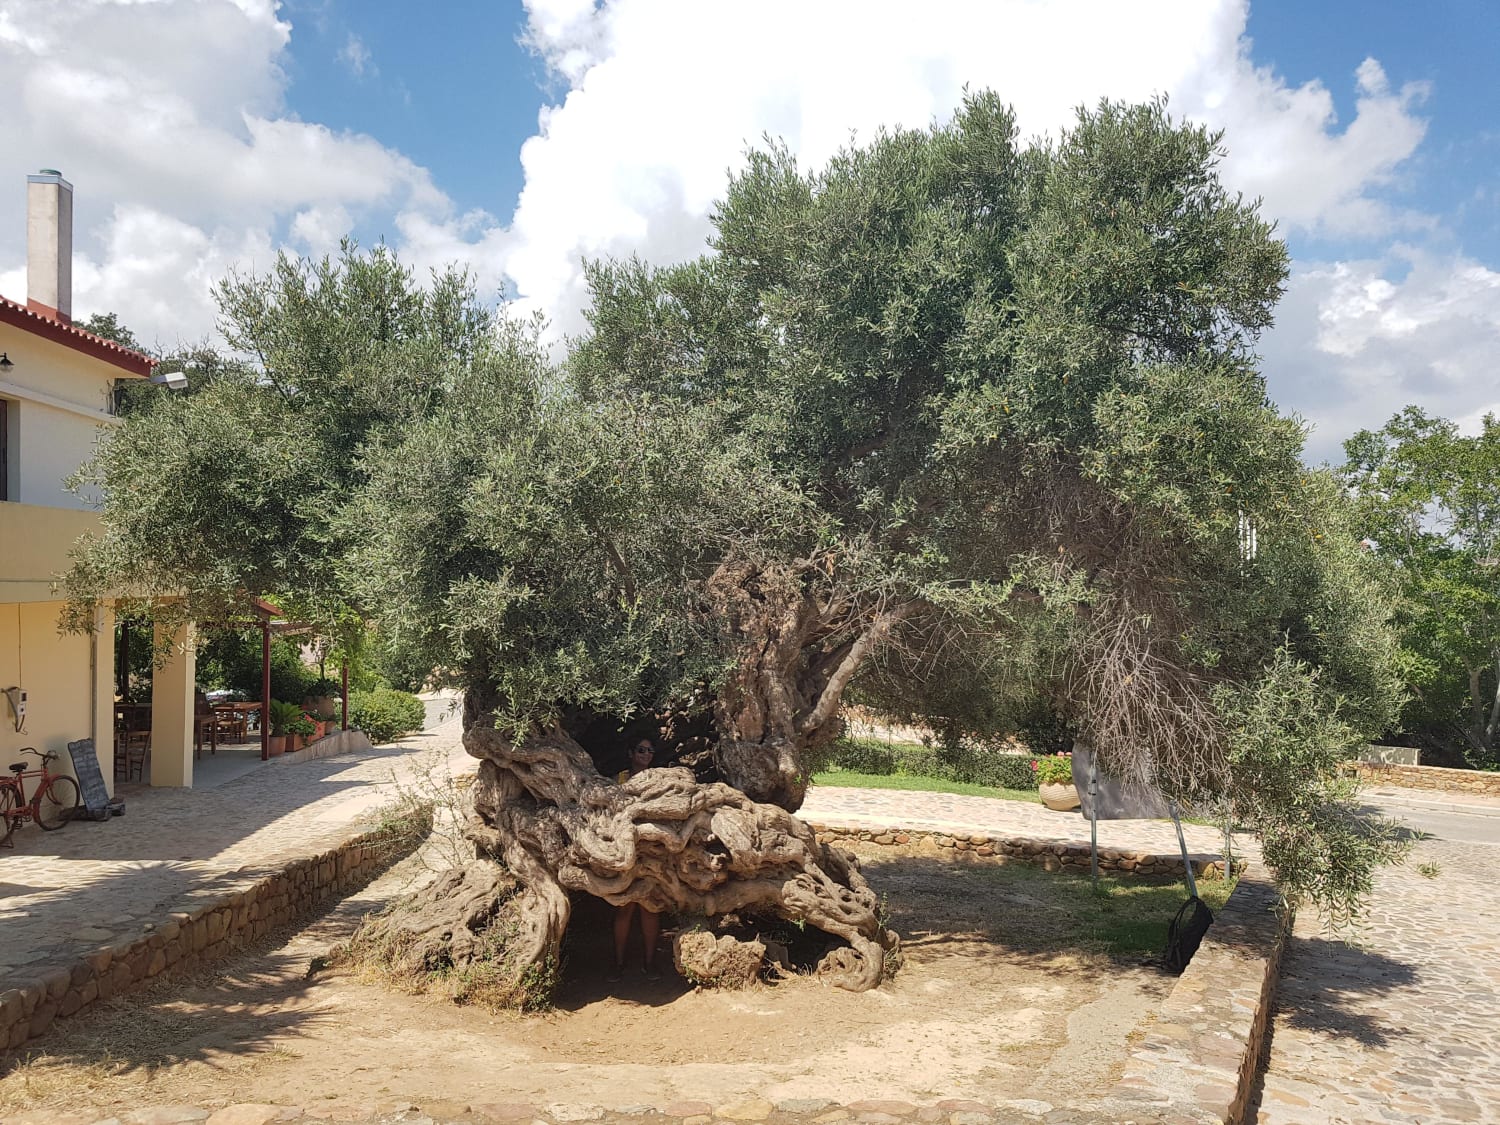 A 2000 year-old olive tree in Crete, Greece